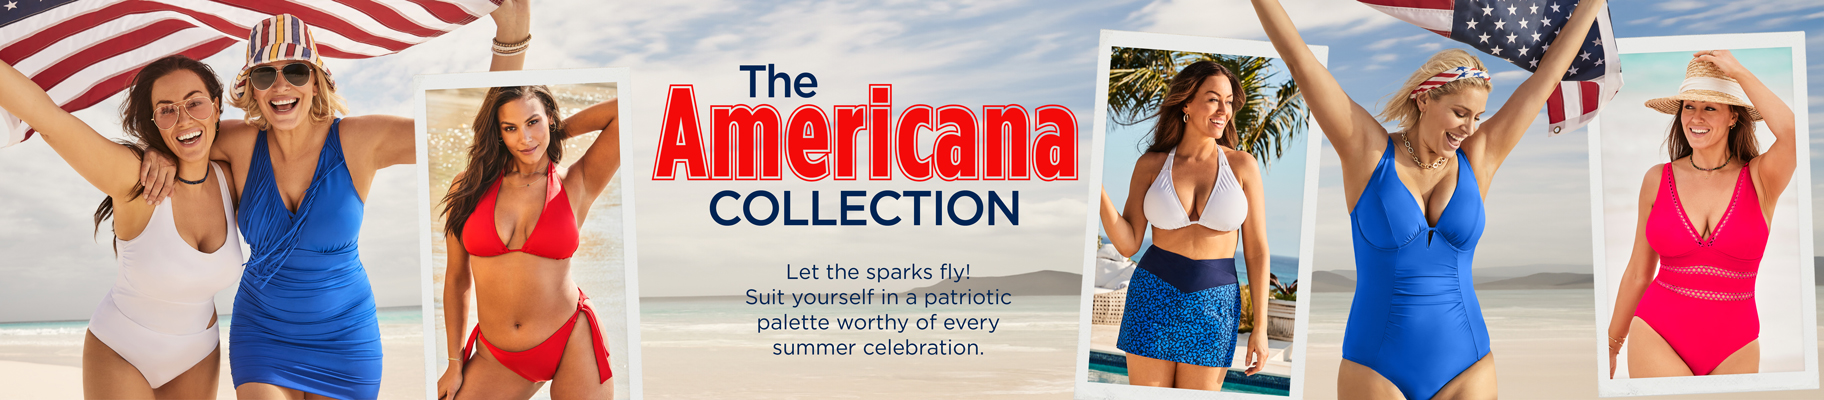 Shop The Americana Collection: Let the sparks fly! Suit yourself in a patriotic palette worthy of every summer celebration